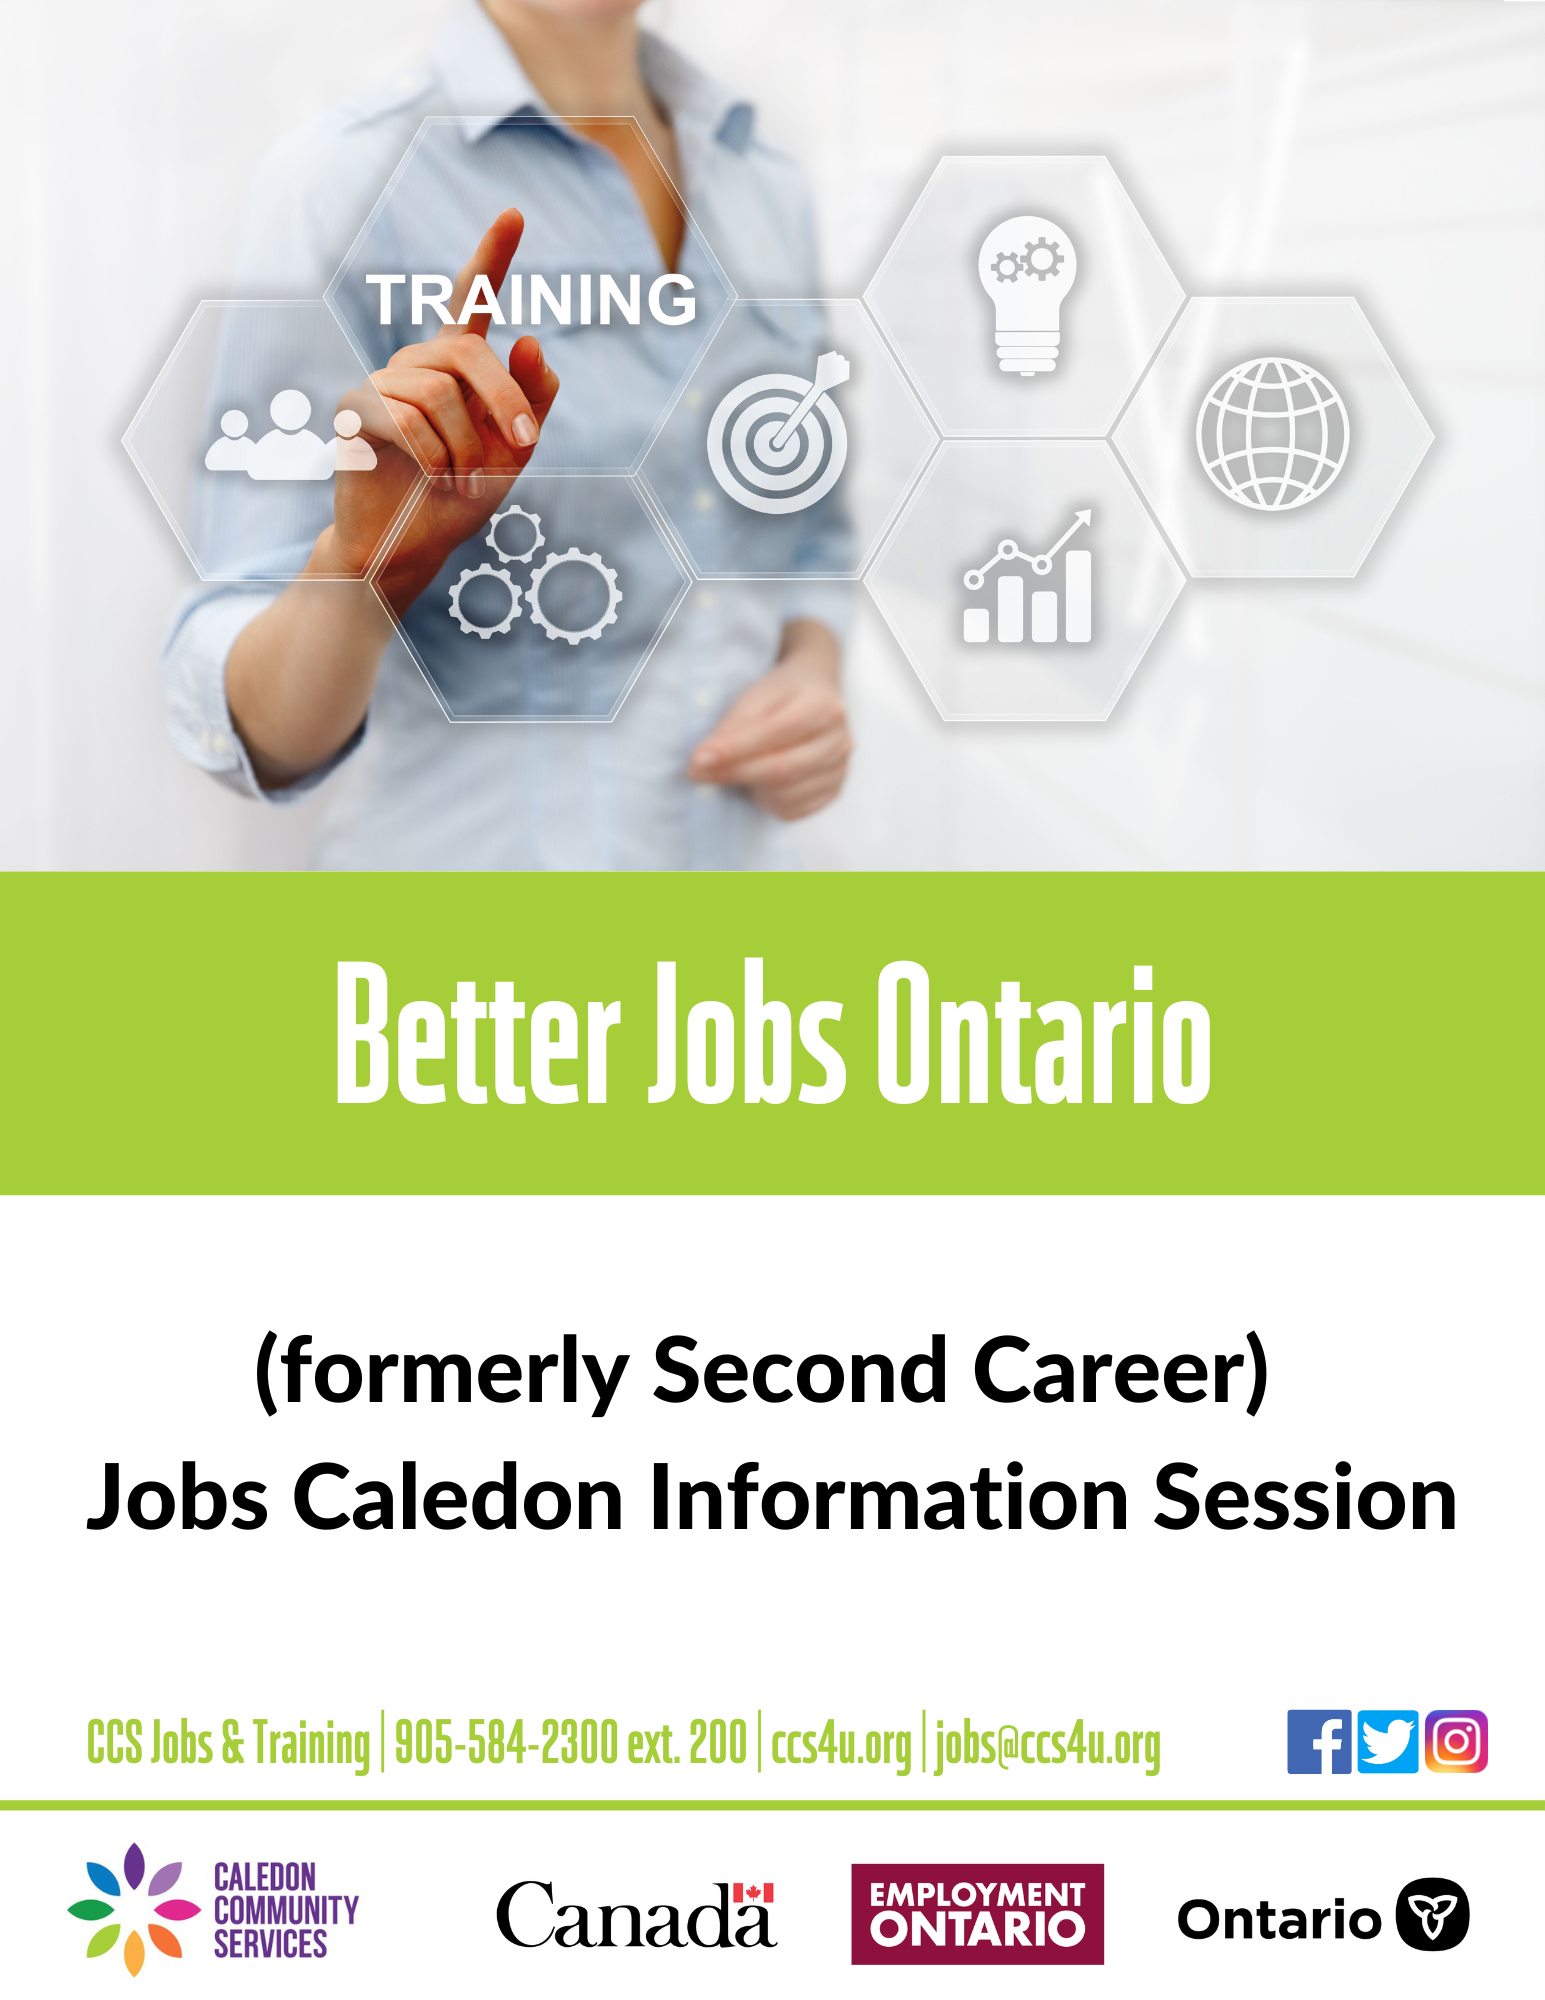 Better Jobs Ontario Flyer APPROVED